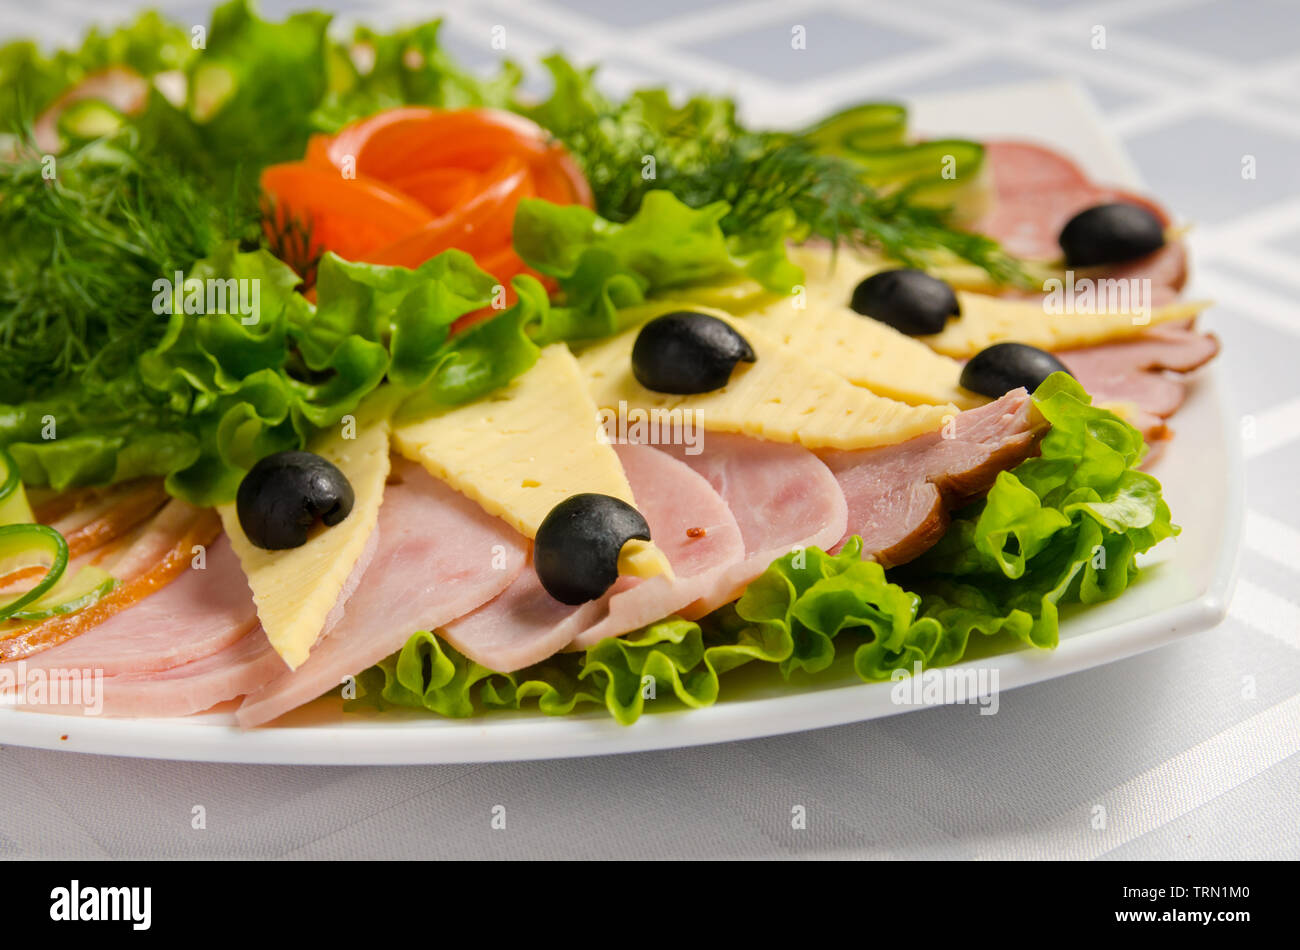 banquet cutting with ham, meat delicacies, cheese, sausage smoked, olive, lettuce and tomato on white dish. Stock Photo